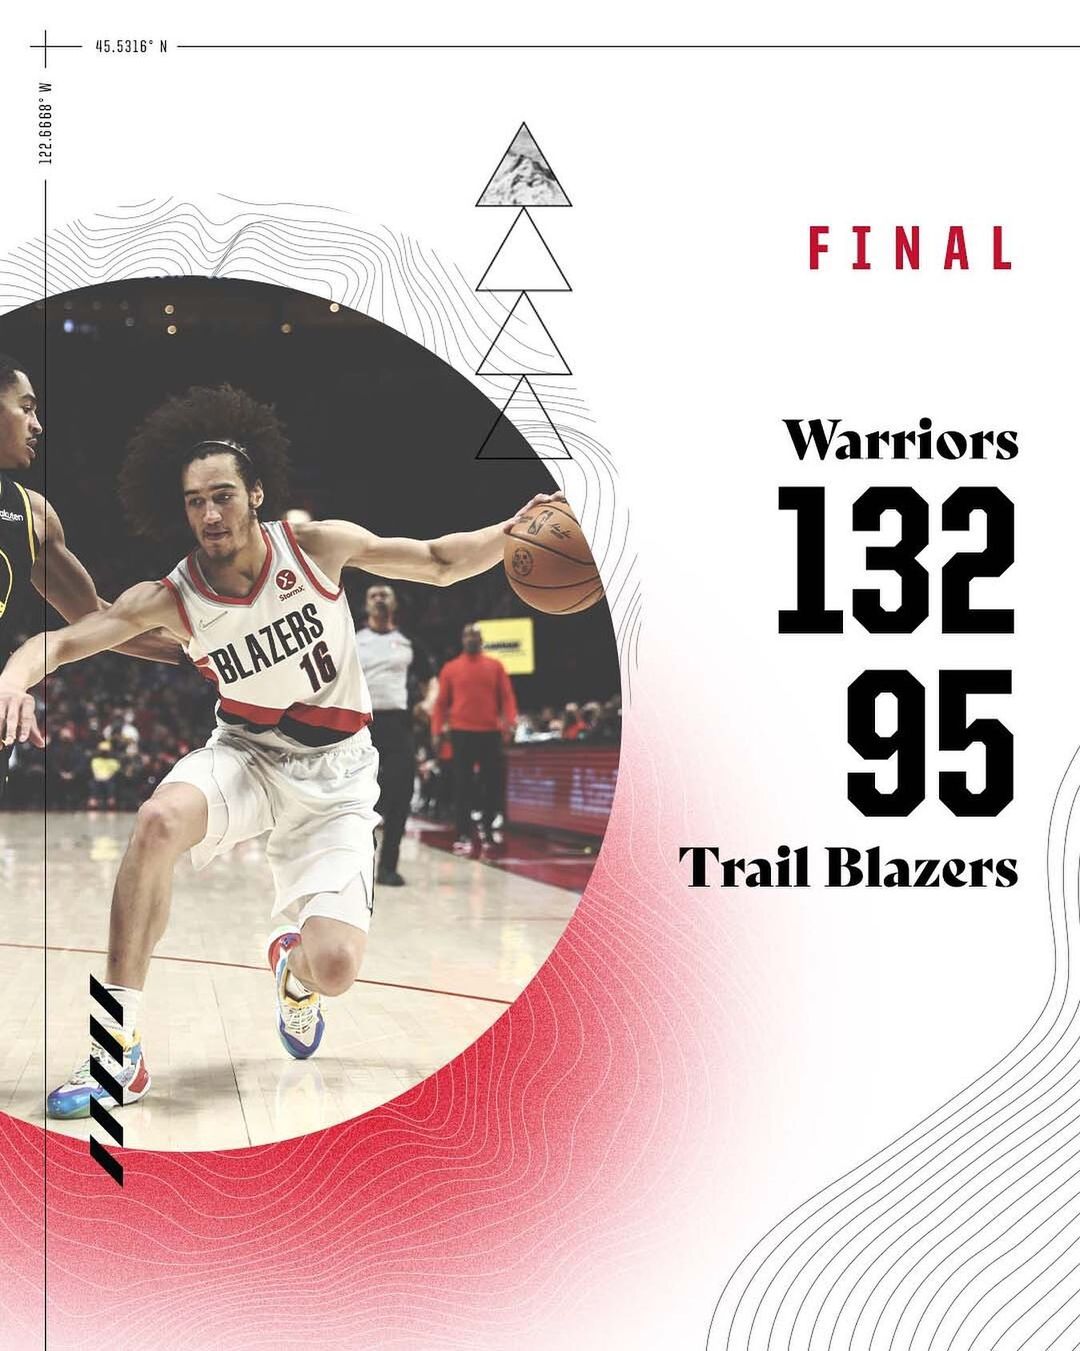 See you back here Sunday.  #RipCity...